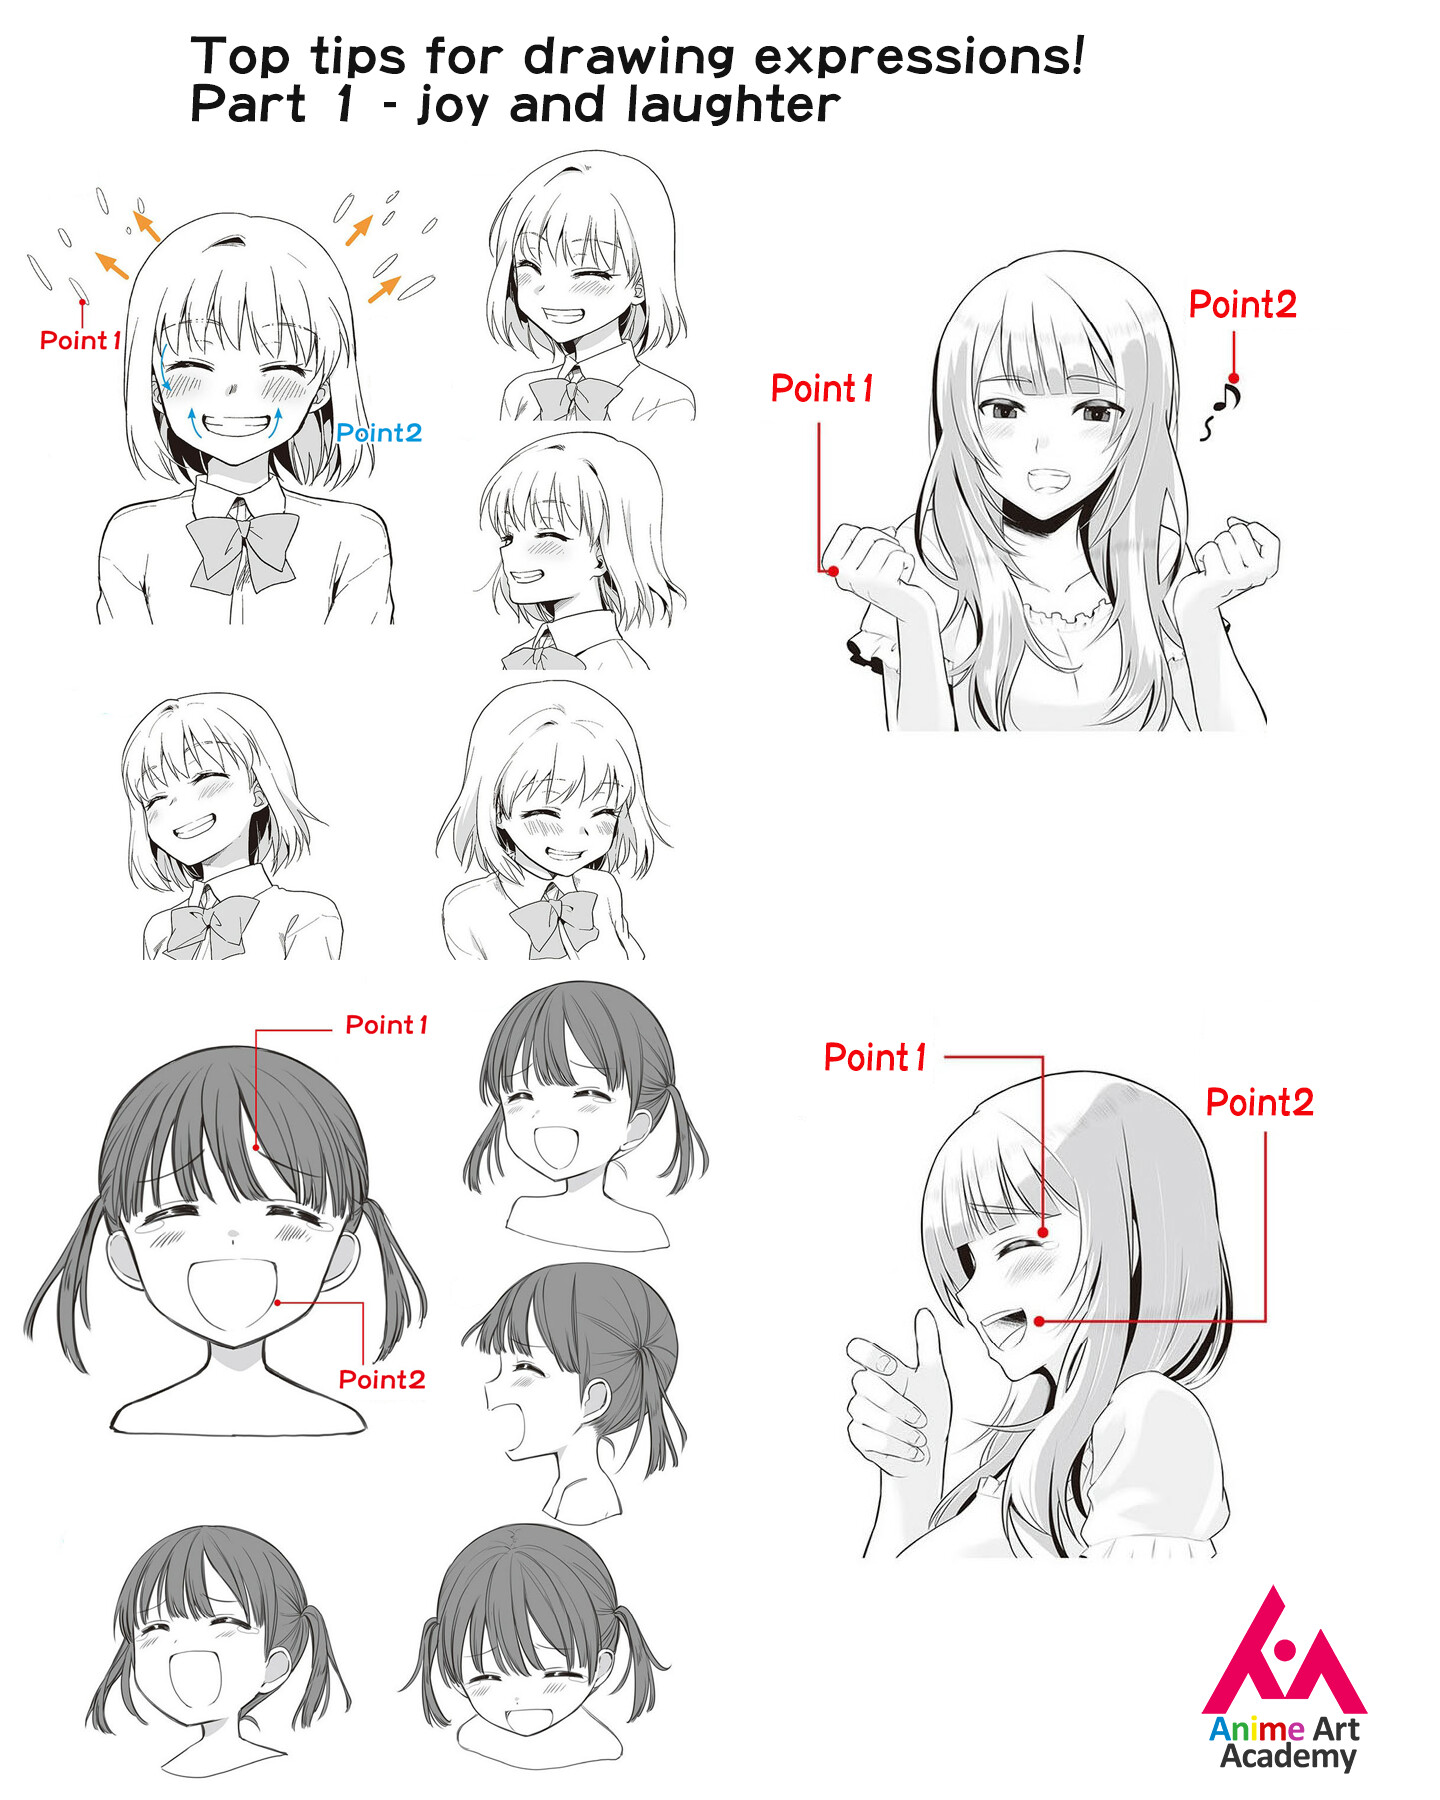 ArtStation - Tutorial - step by step - How to Draw Anime!